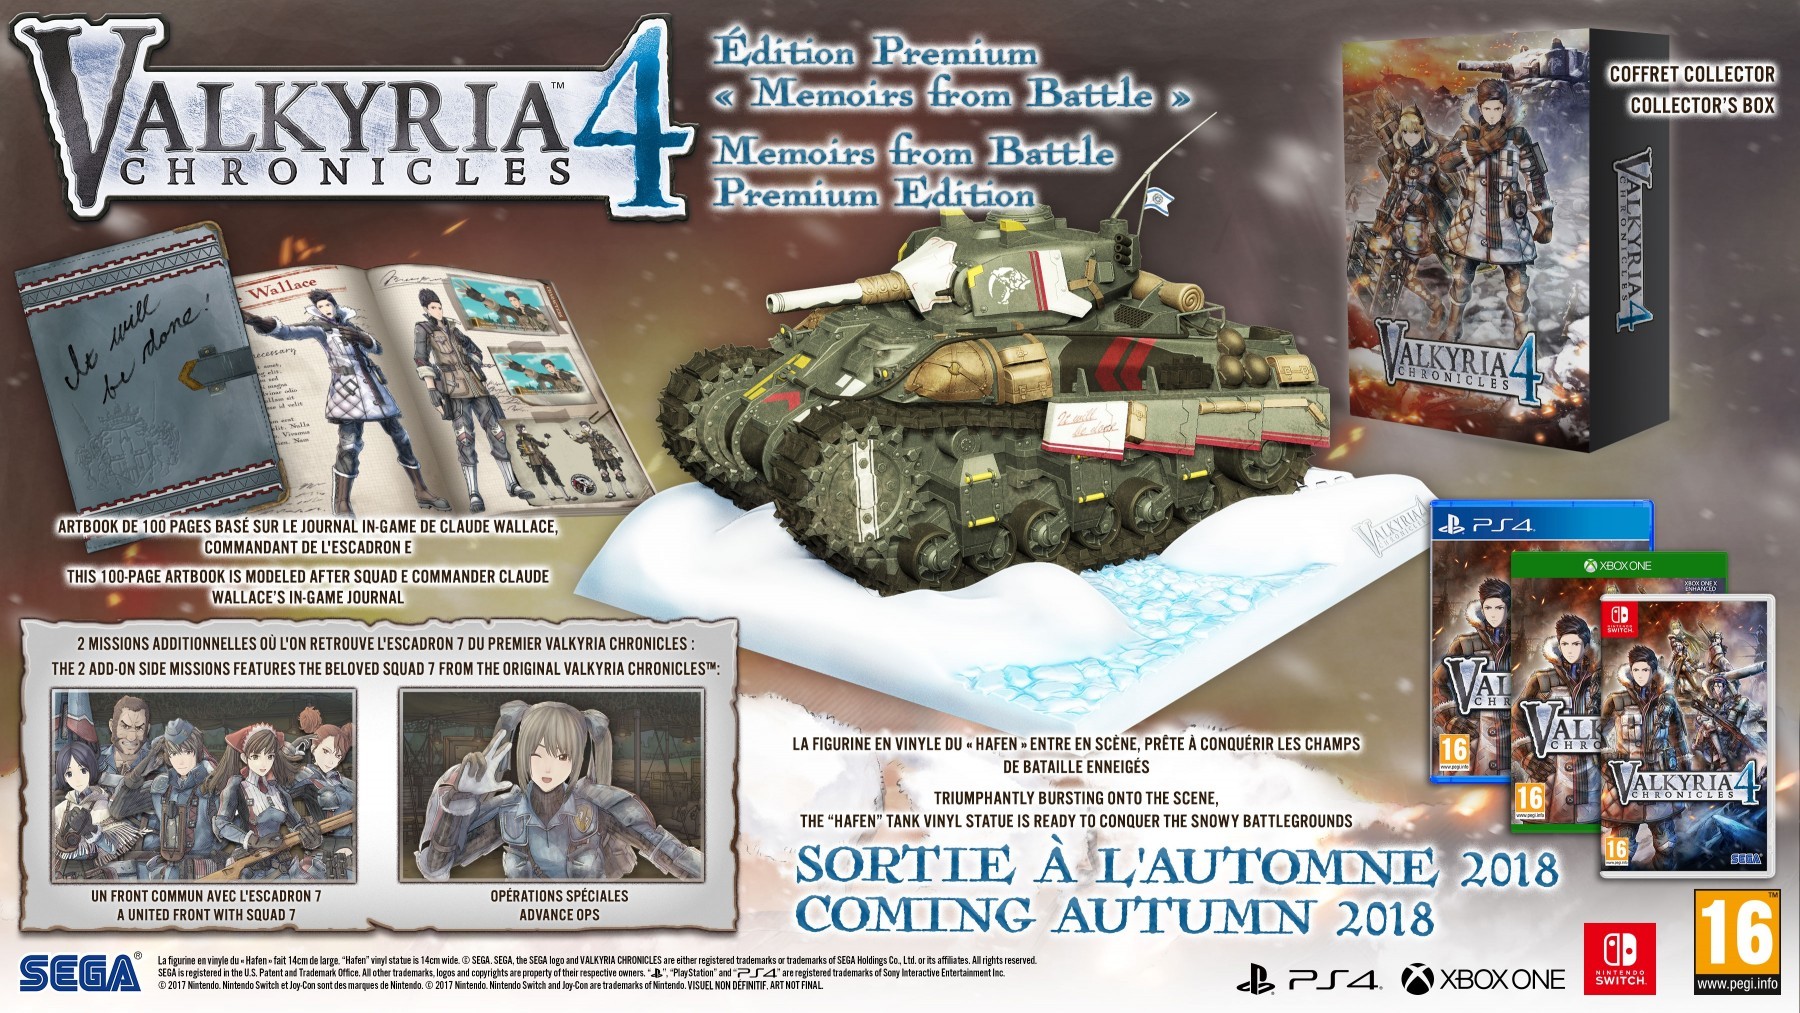 Valkyria Chronicles 4 Memoirs from Battle Collector Edition (PS4), Sega CS3